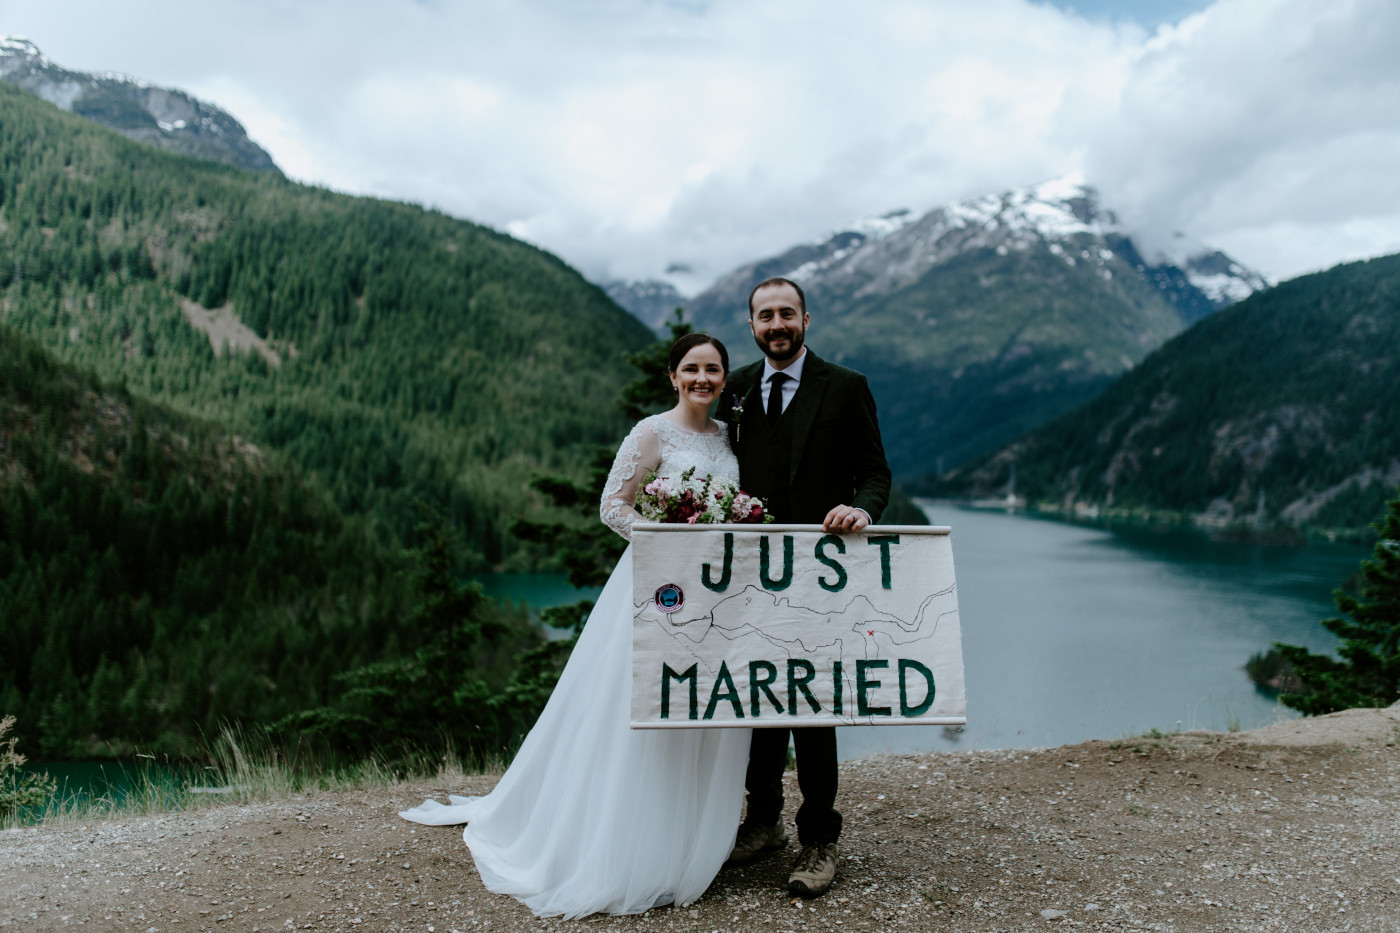 Elizabeth and Alex hold up a homemade map of where they eloped at the top of the Diablo Lake Overlook. Elopement photography at North Cascades National Park by Sienna Plus Josh.